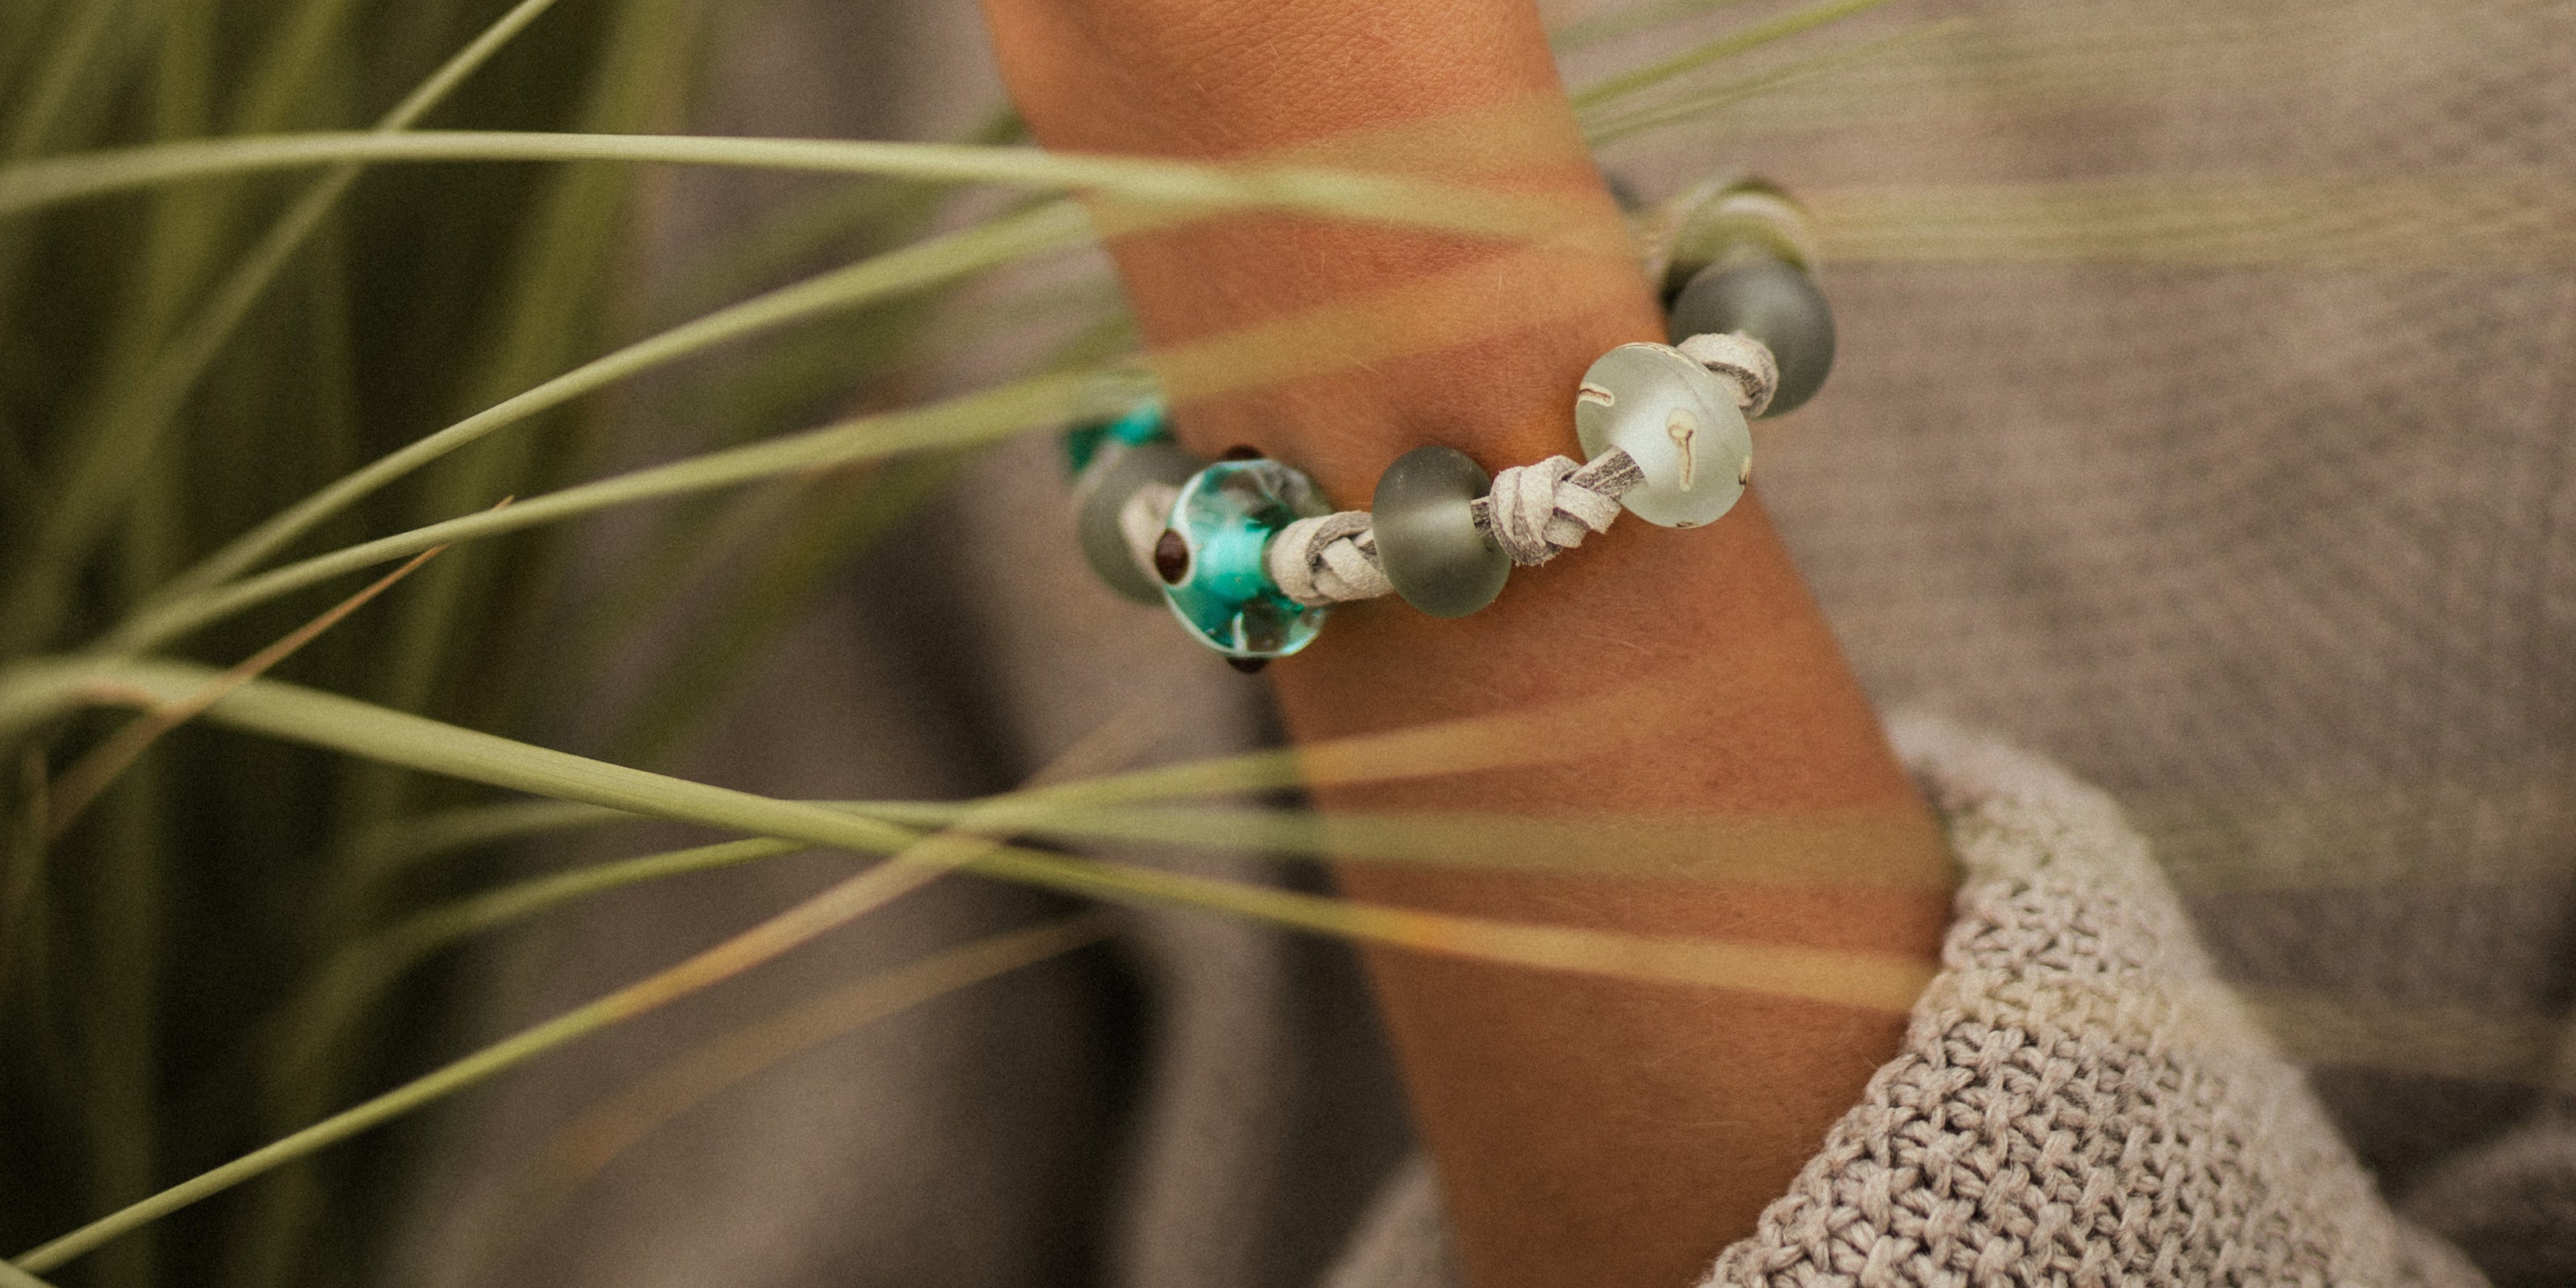 Devon surf beads on grey cord bracelet worn by woman wearing brown knitted jumper on the beach.